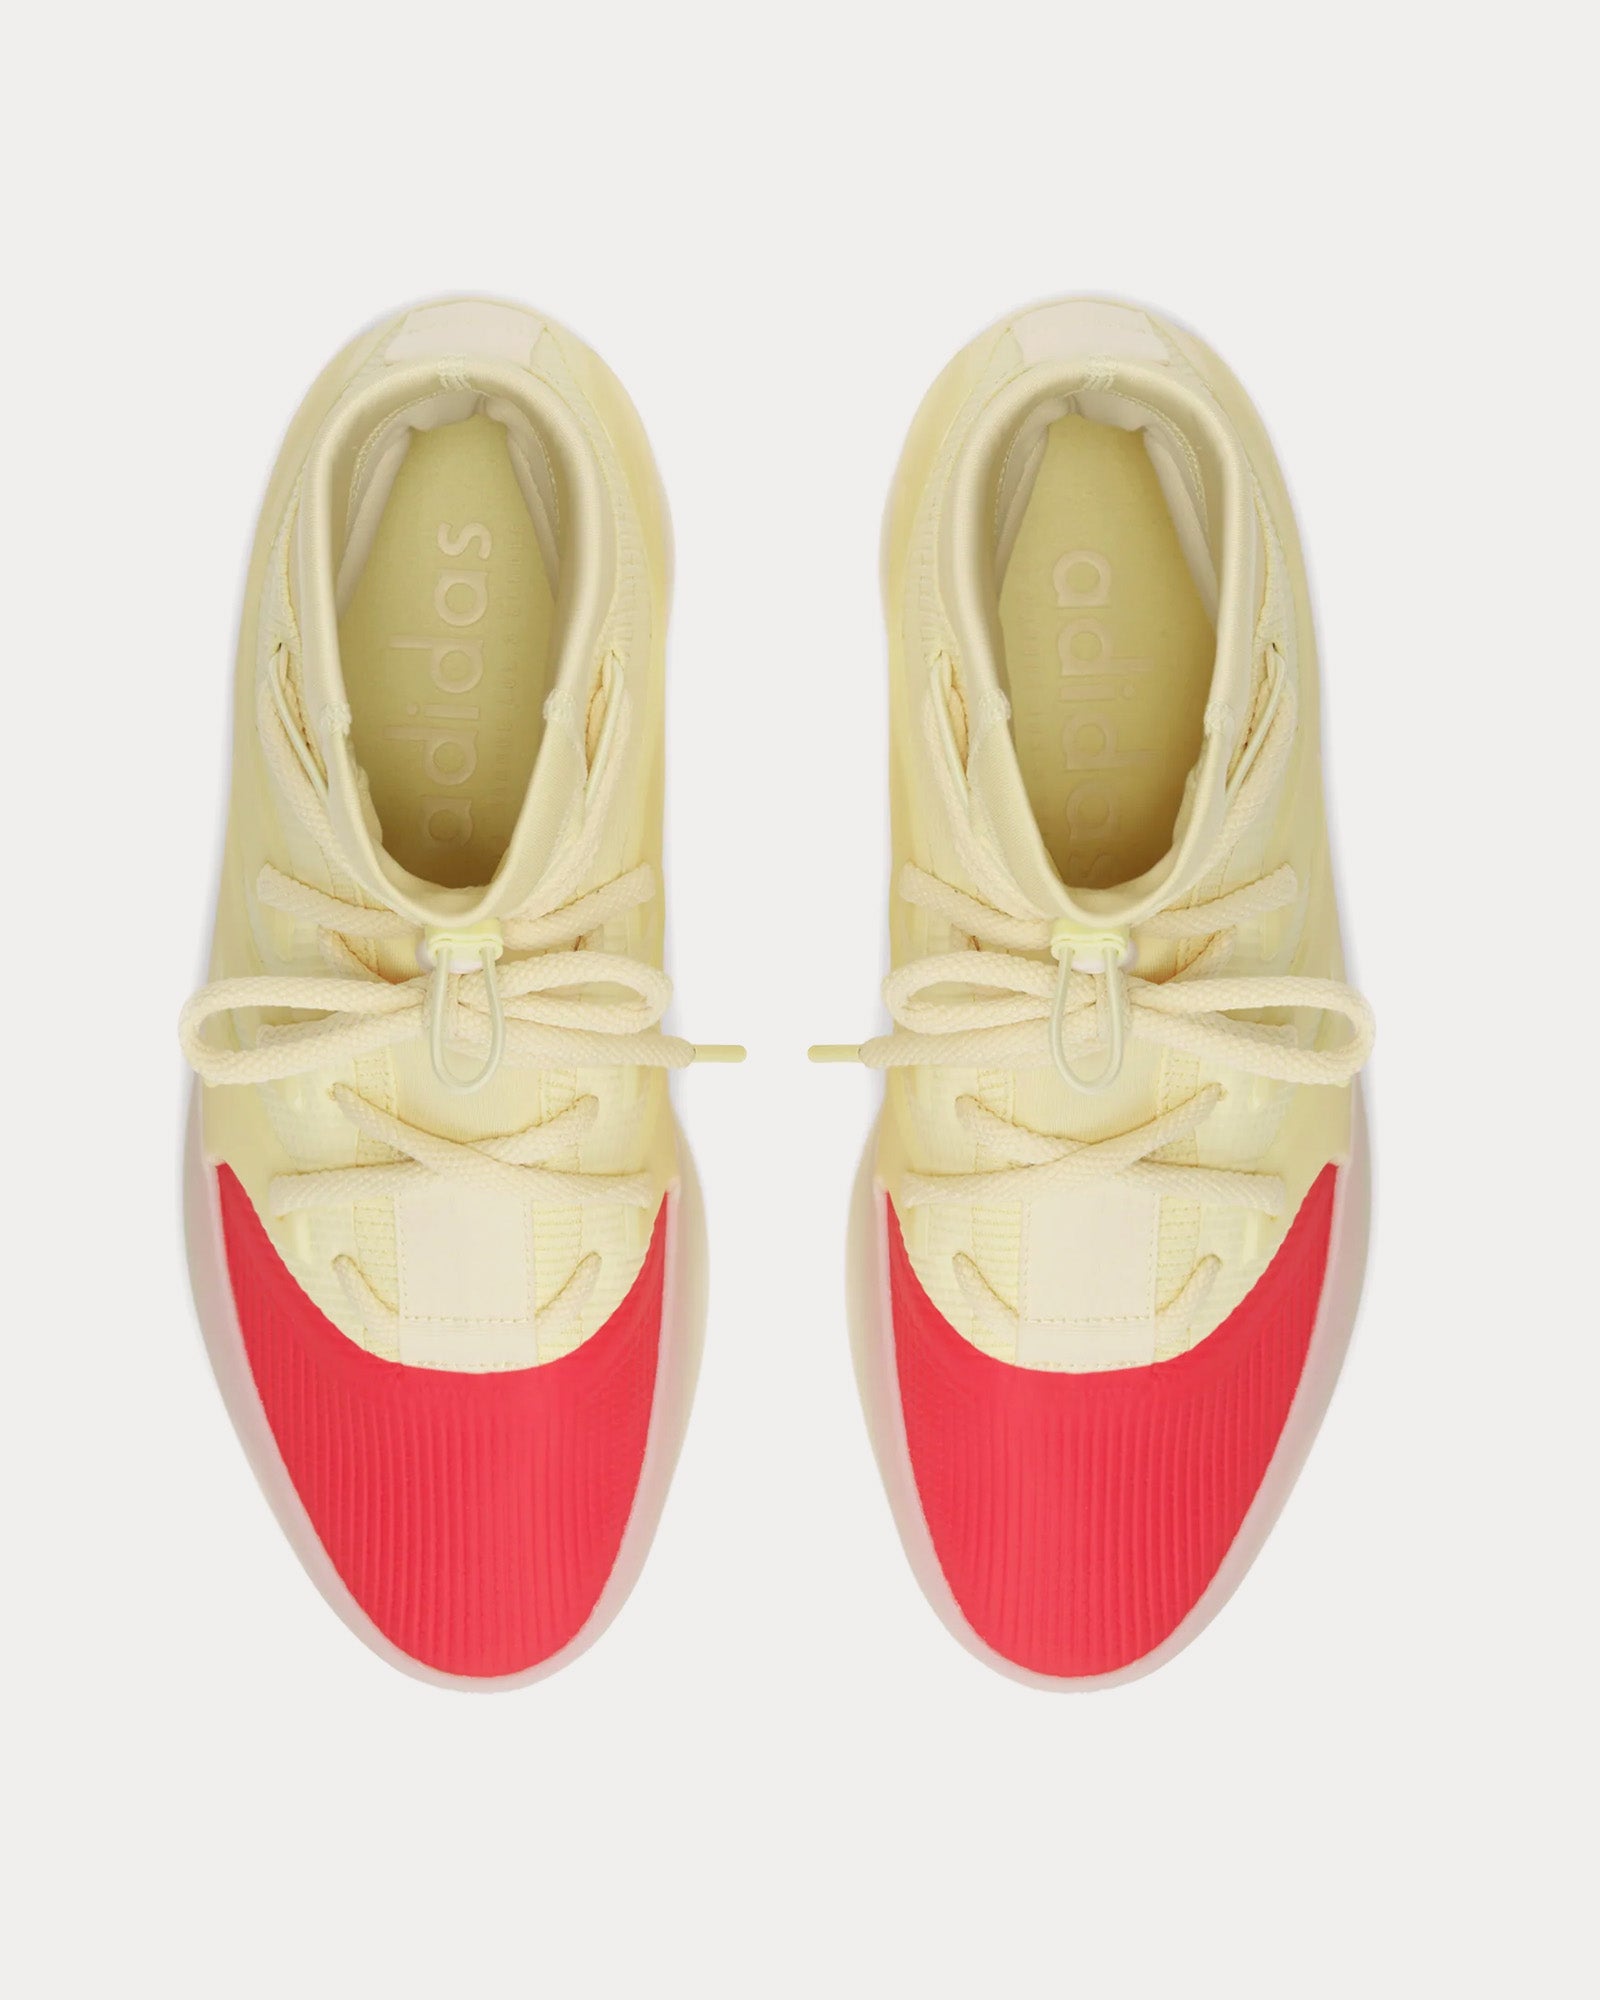 Fear of God Athletics - One Model Sand / Coral High Top Sneakers